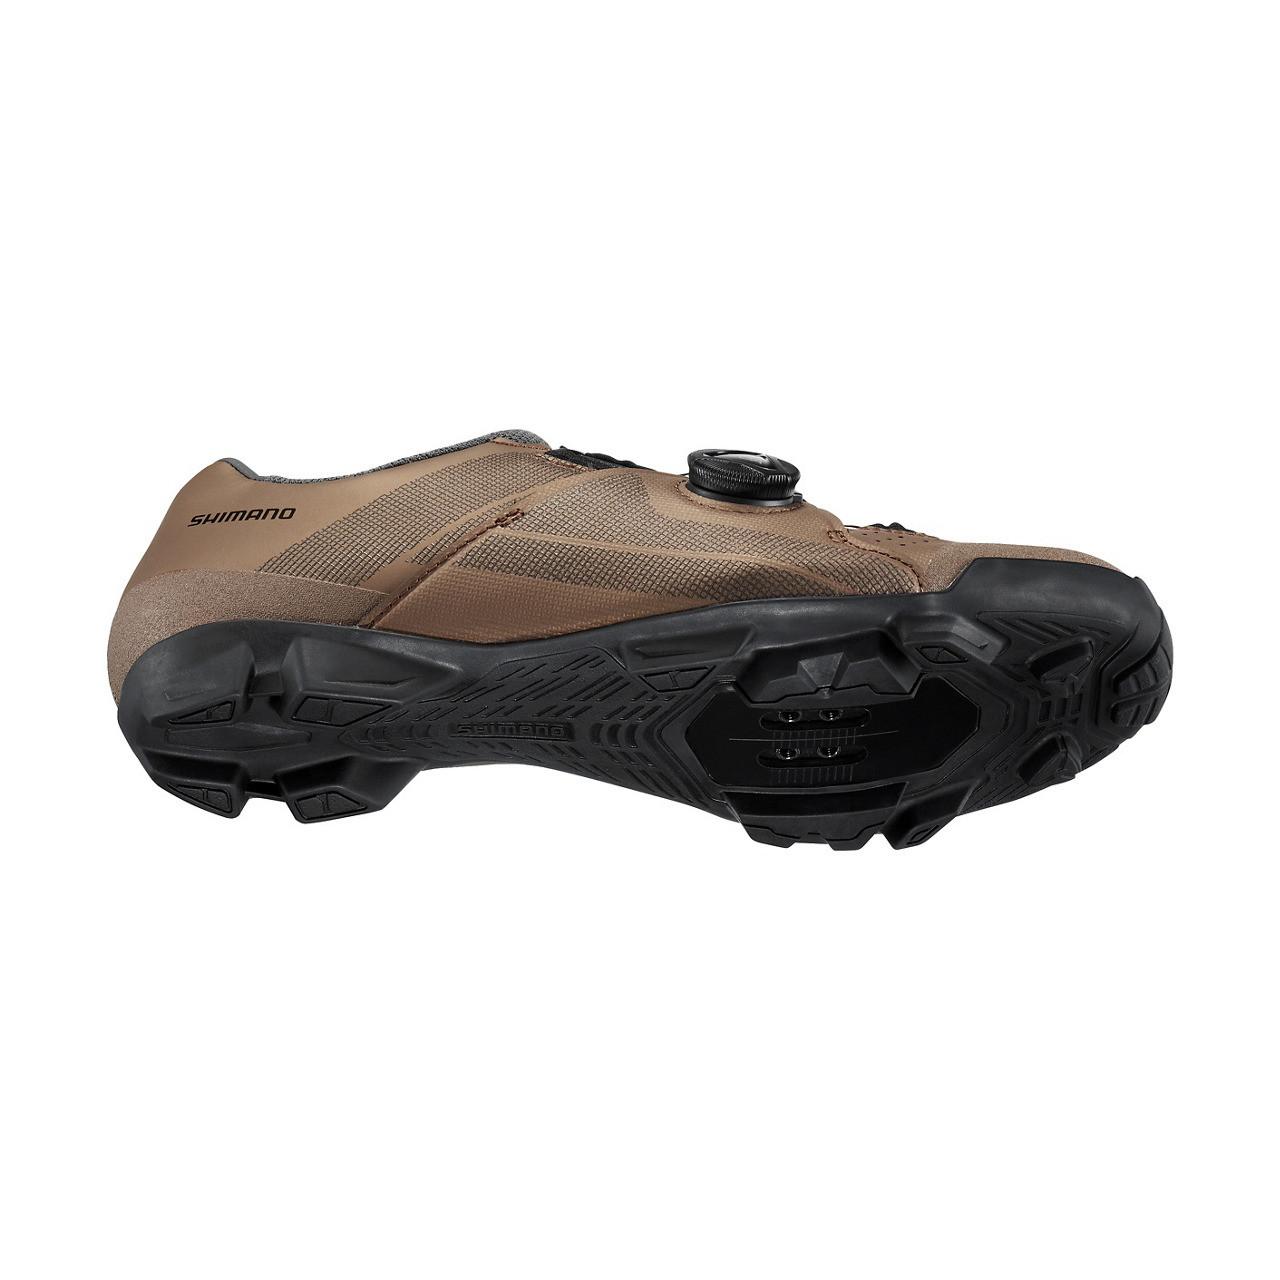 SHIMANO  Chaussures femme  SH-XC300 